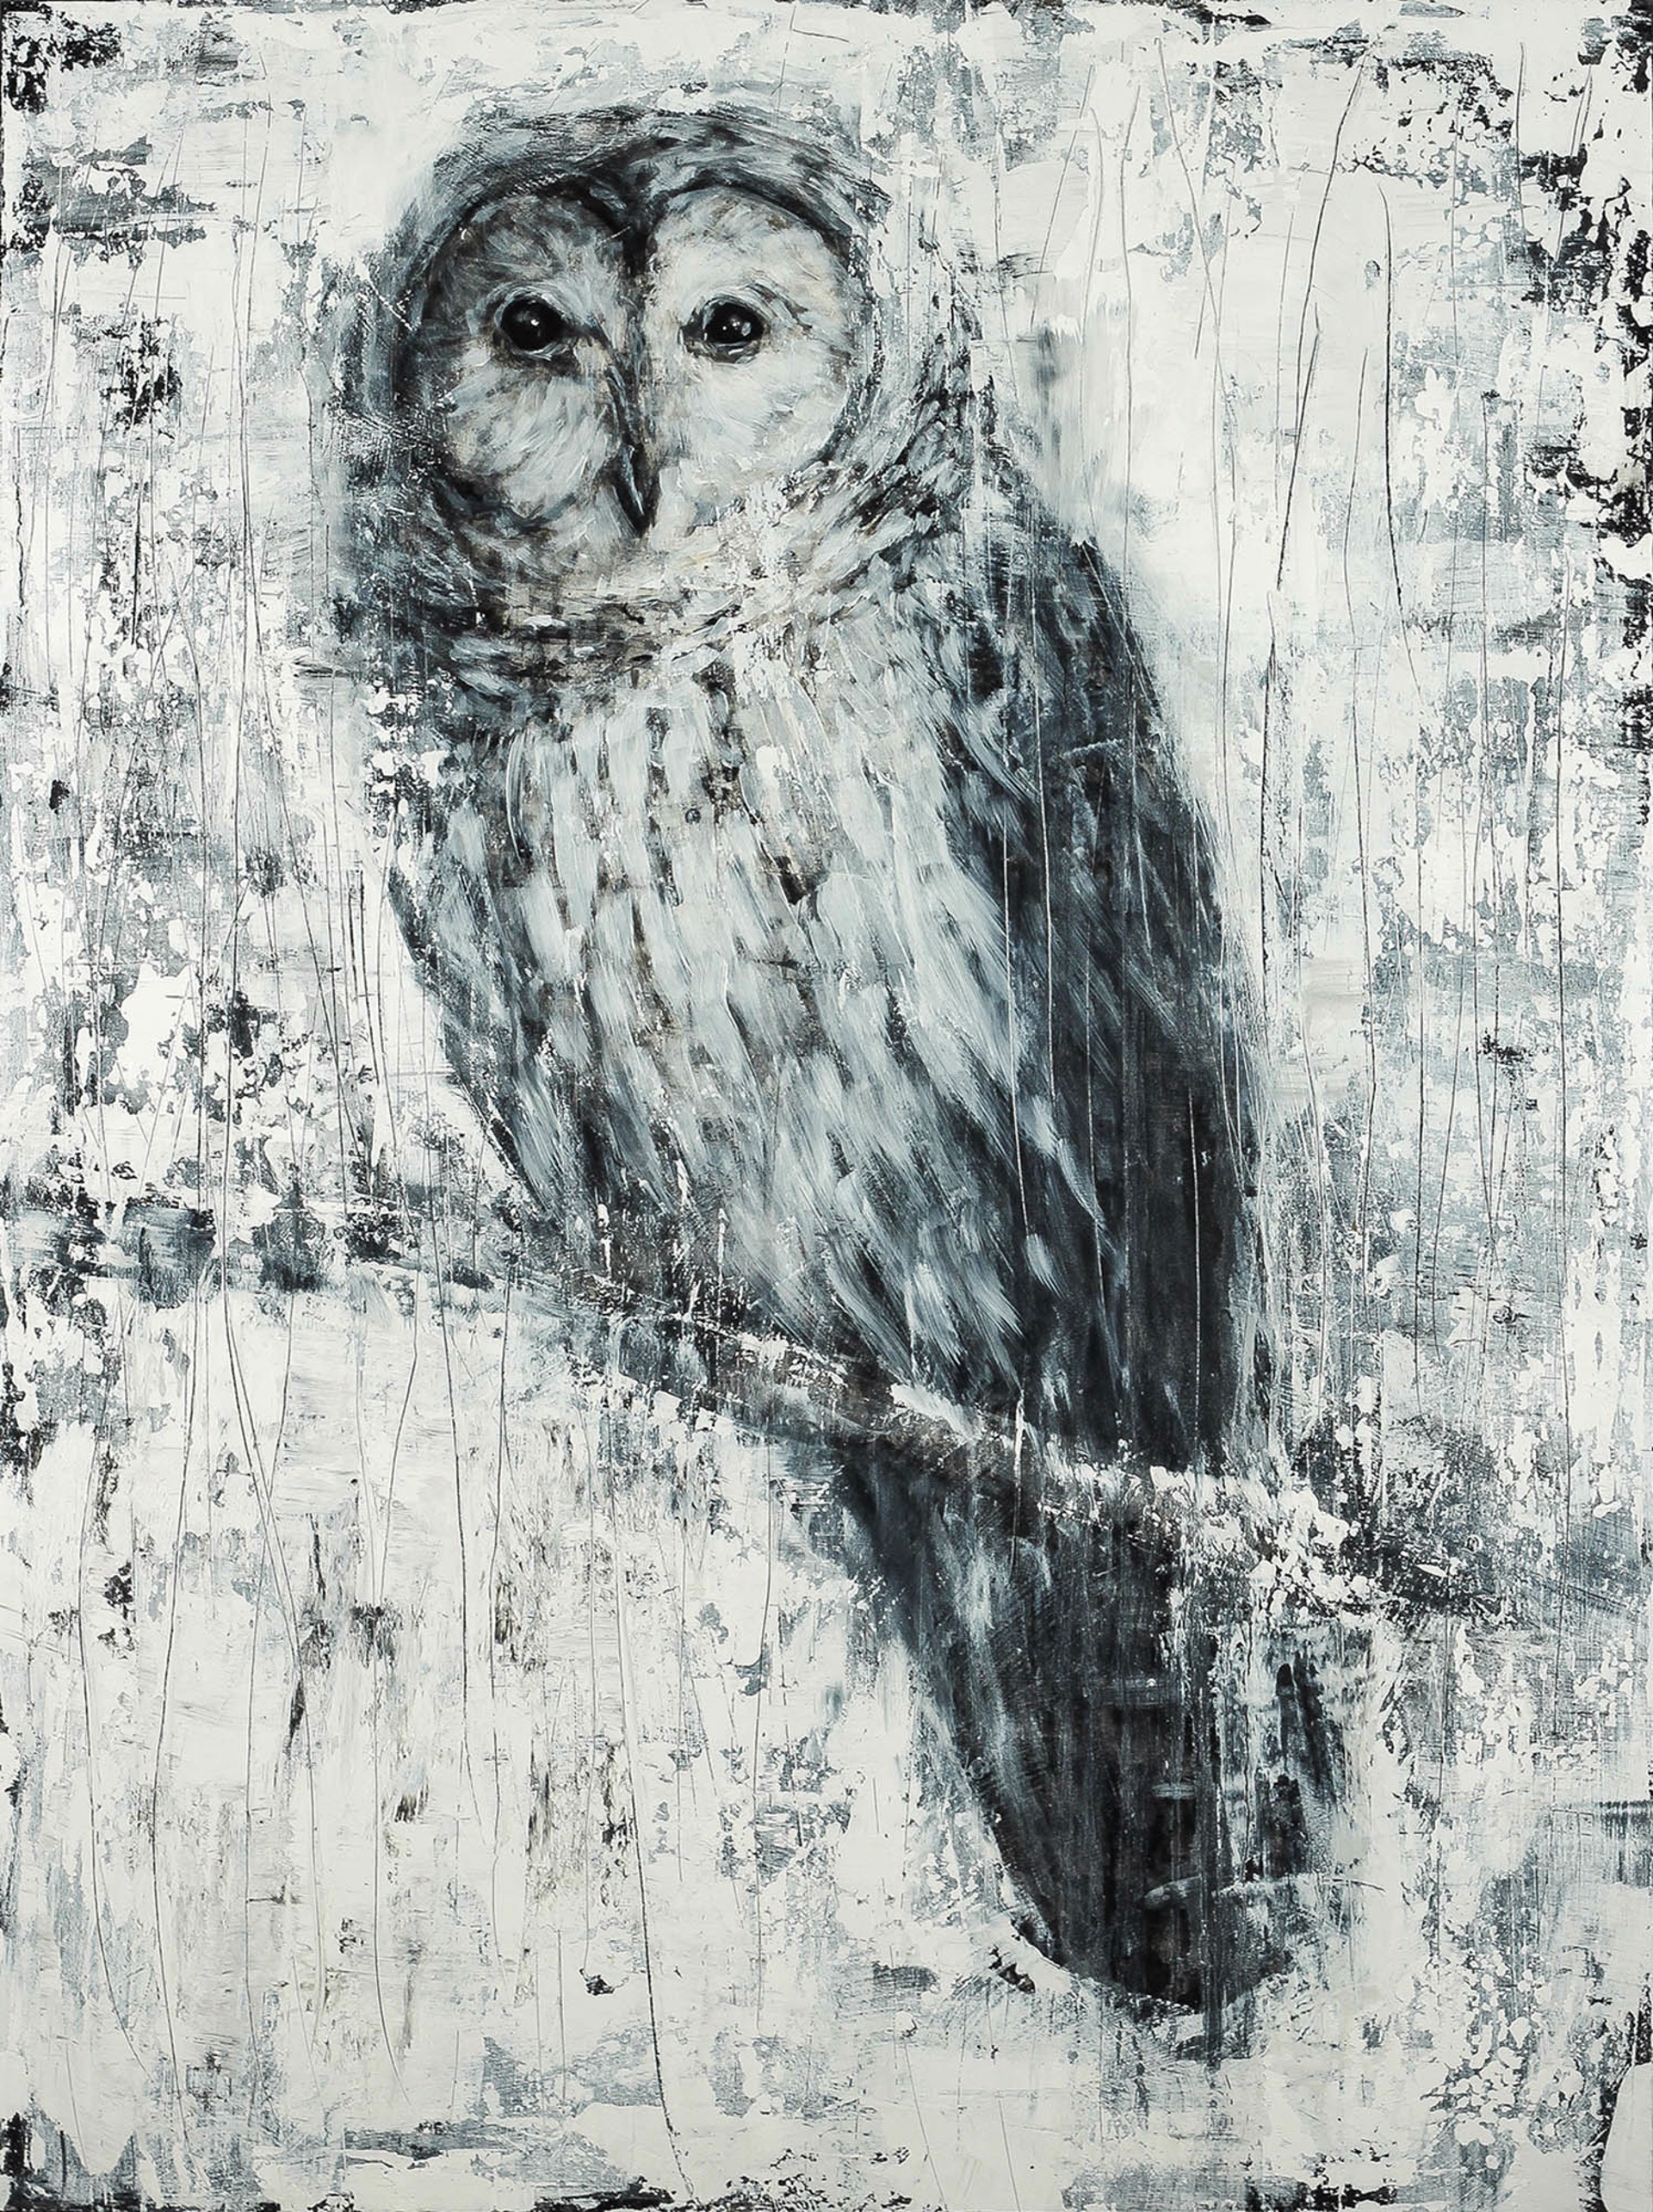 Original Painting Of A Perched Owl In Black And White With Texture, By Matt Flint, Available At Gallery Wild 